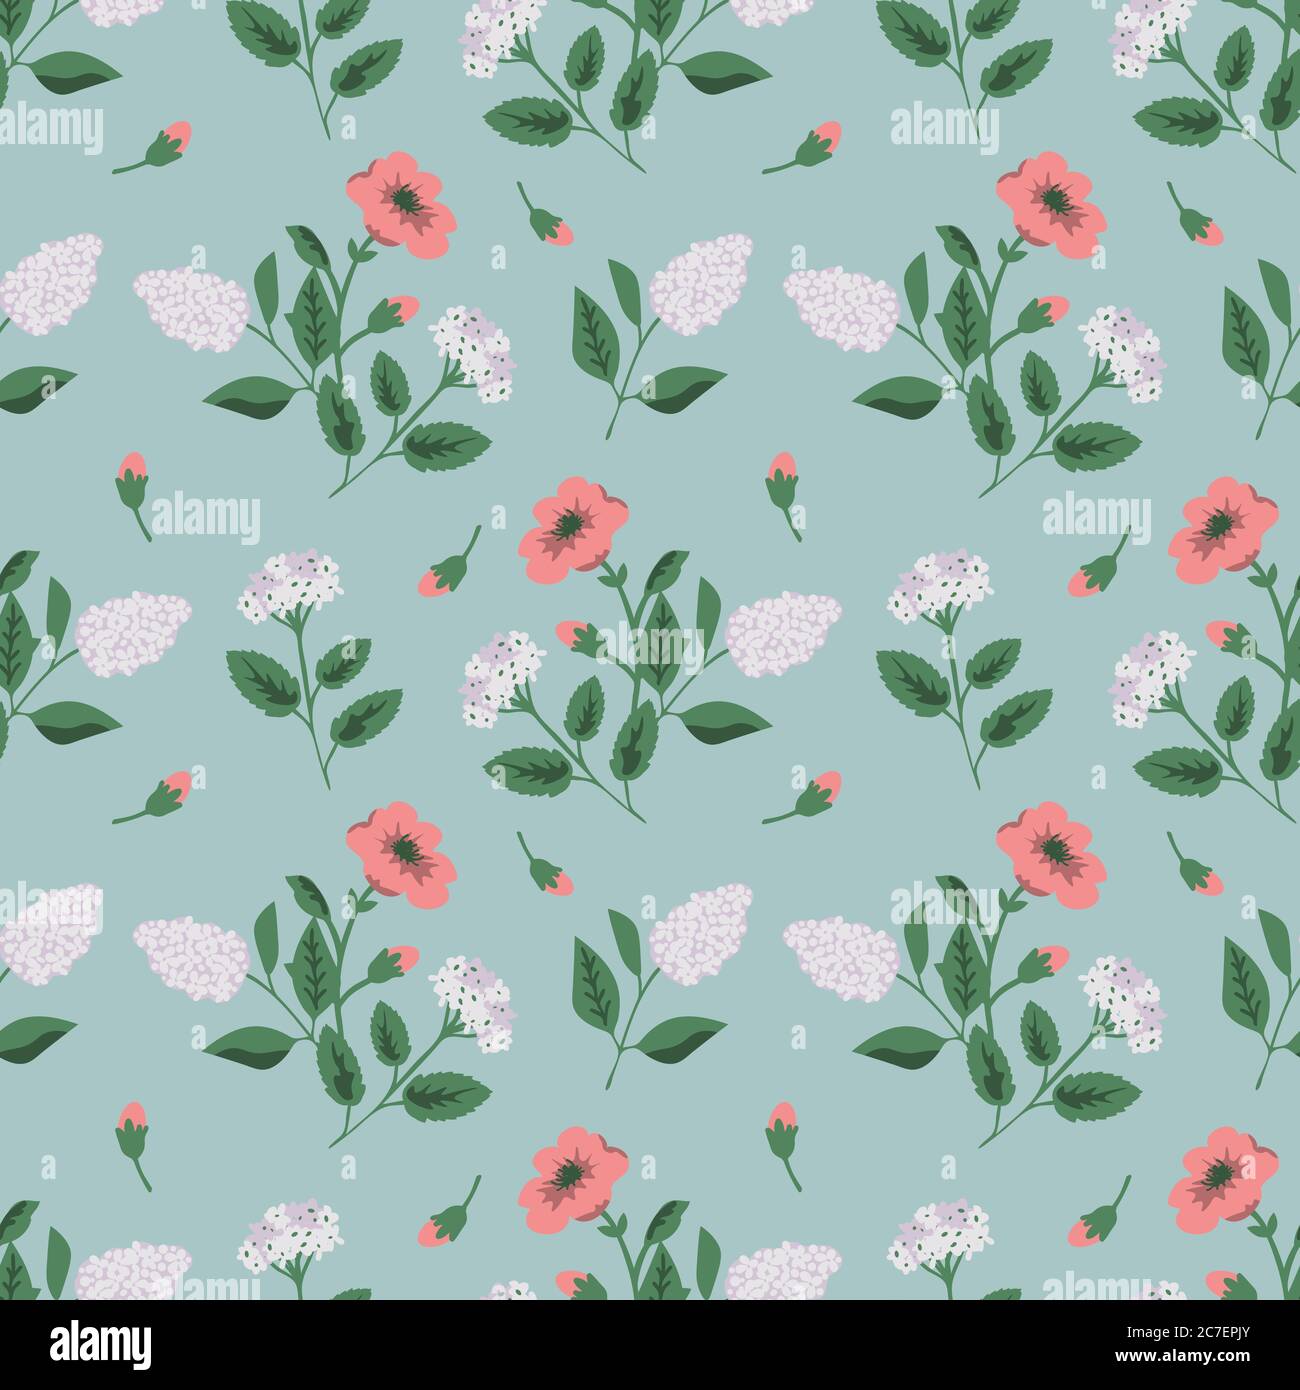 Seamless pattern with decorative flowers Stock Vector